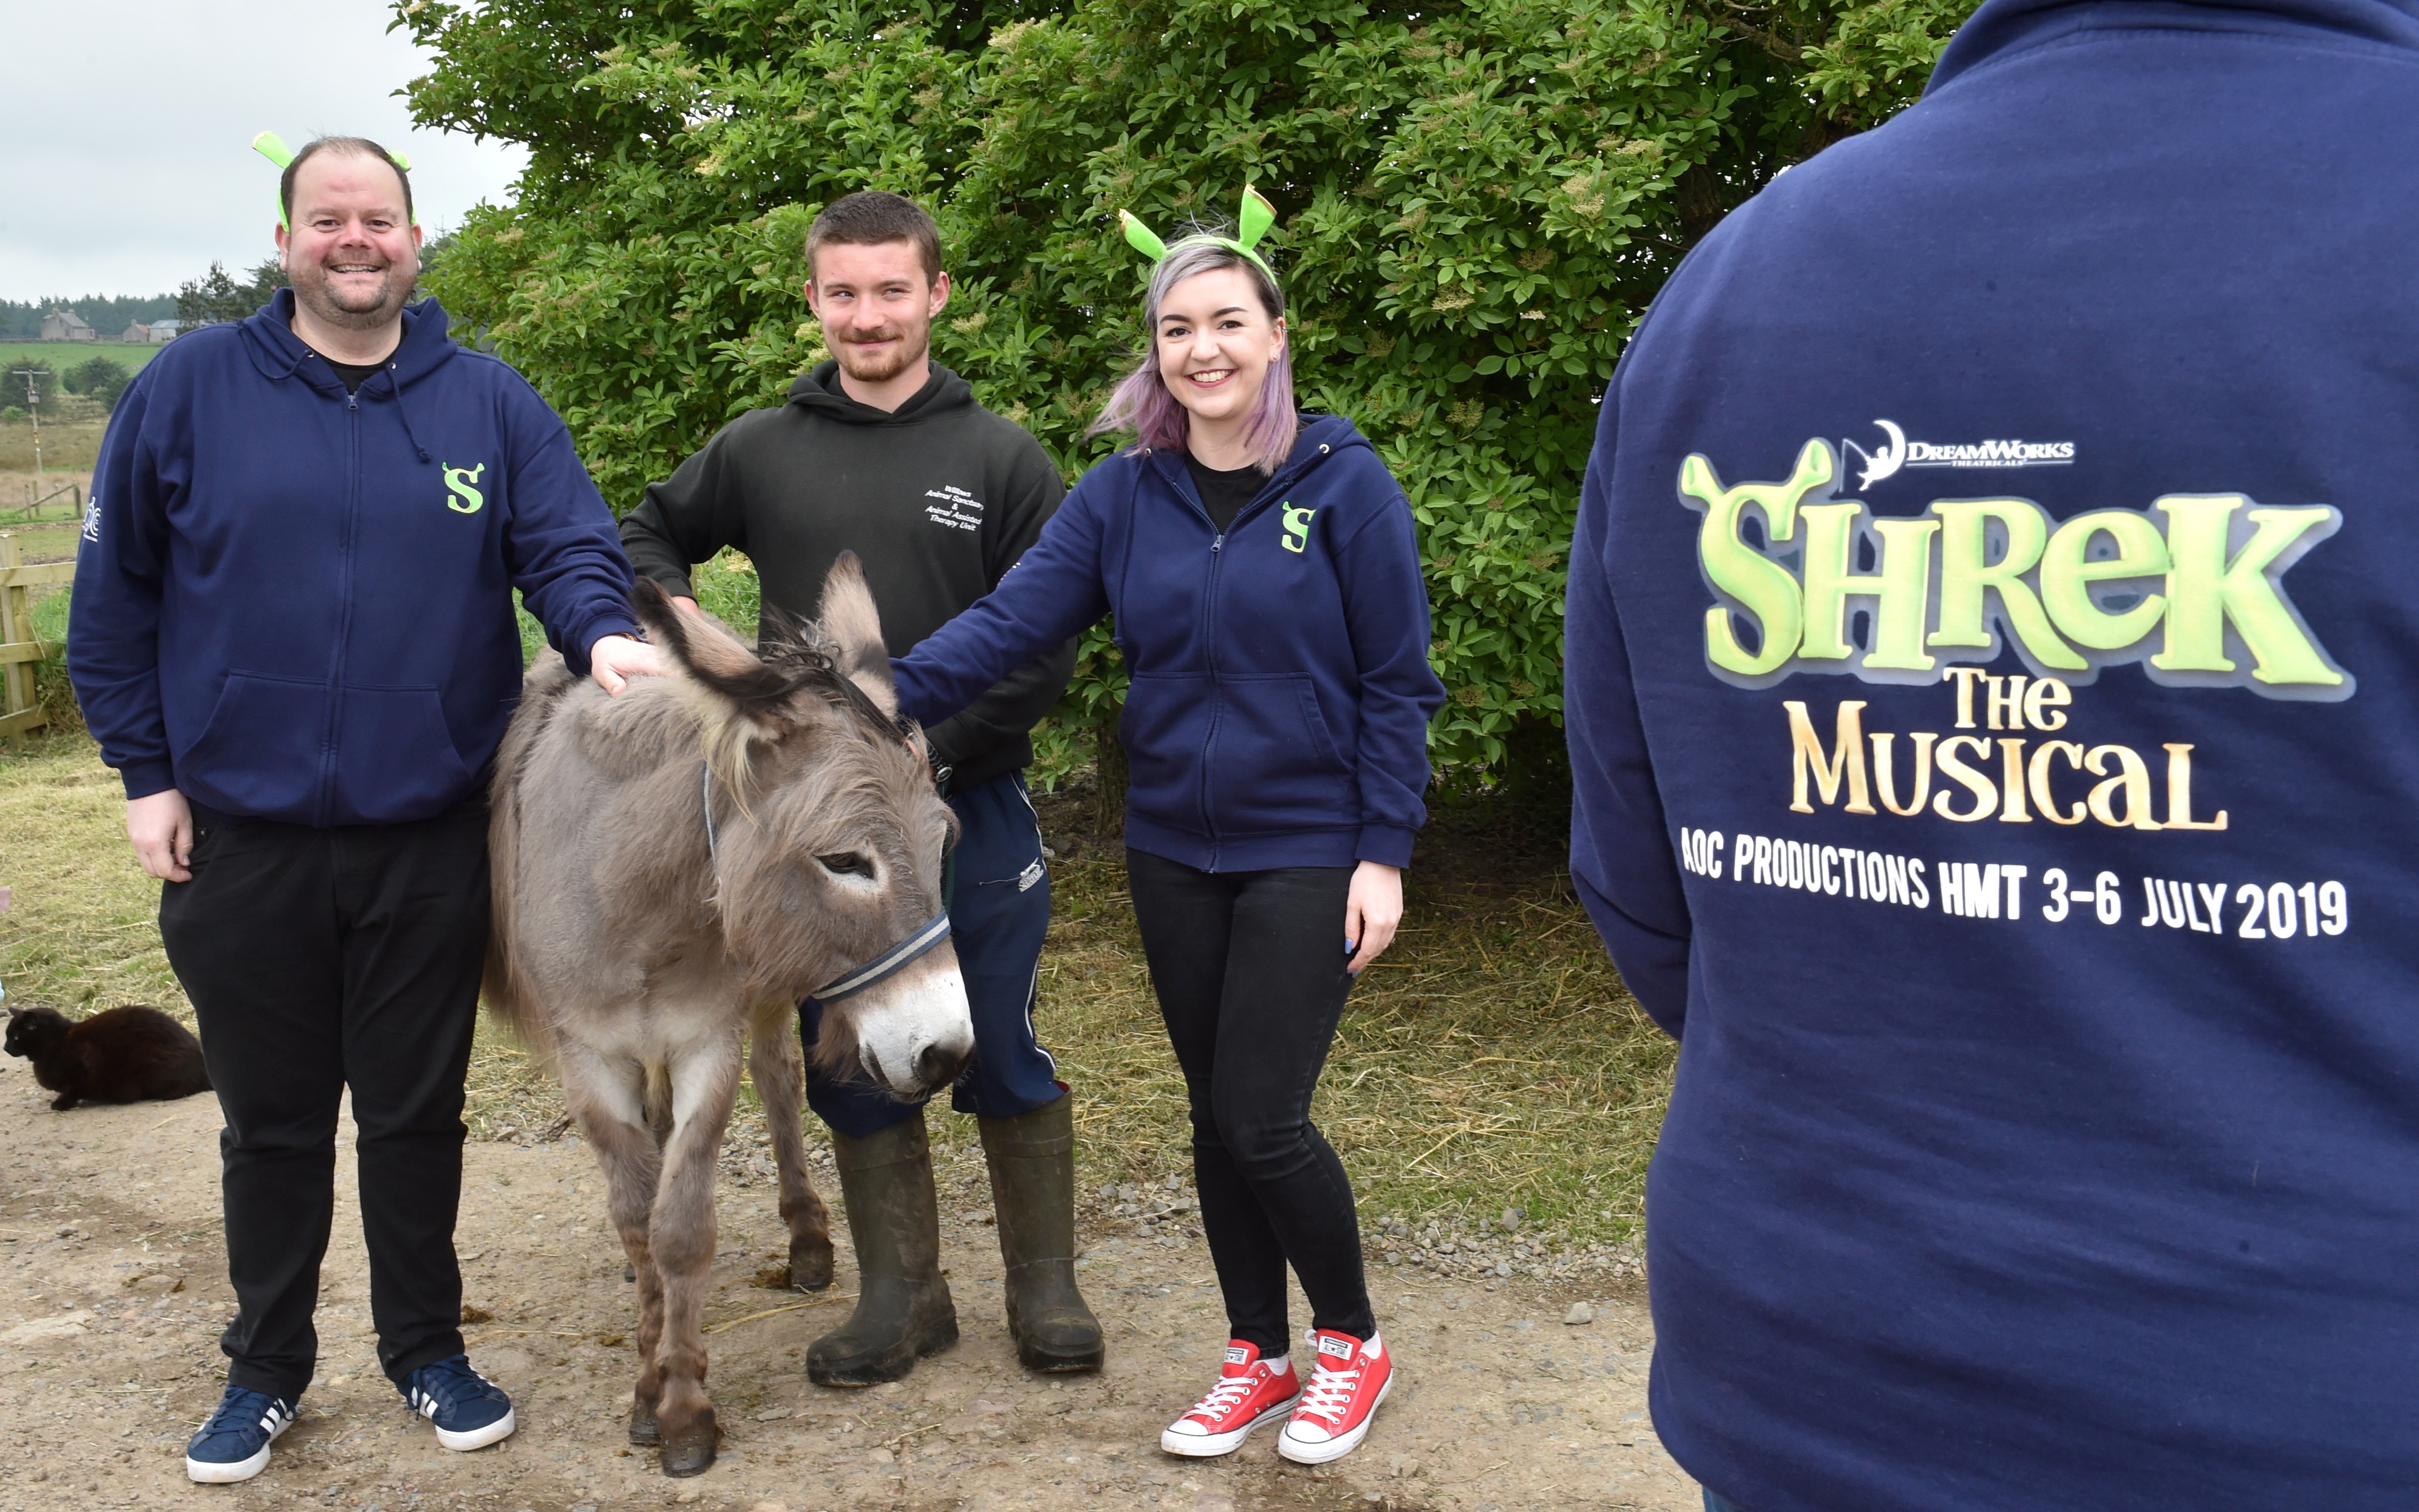 The cast of Shrek visited Willows and met Eeyore the donkey. Pictured (from left) is Scott Jamieson (Shrek), Michael Brown, animal husbandary and Hannah Smith (Sugar Plum Fairy)